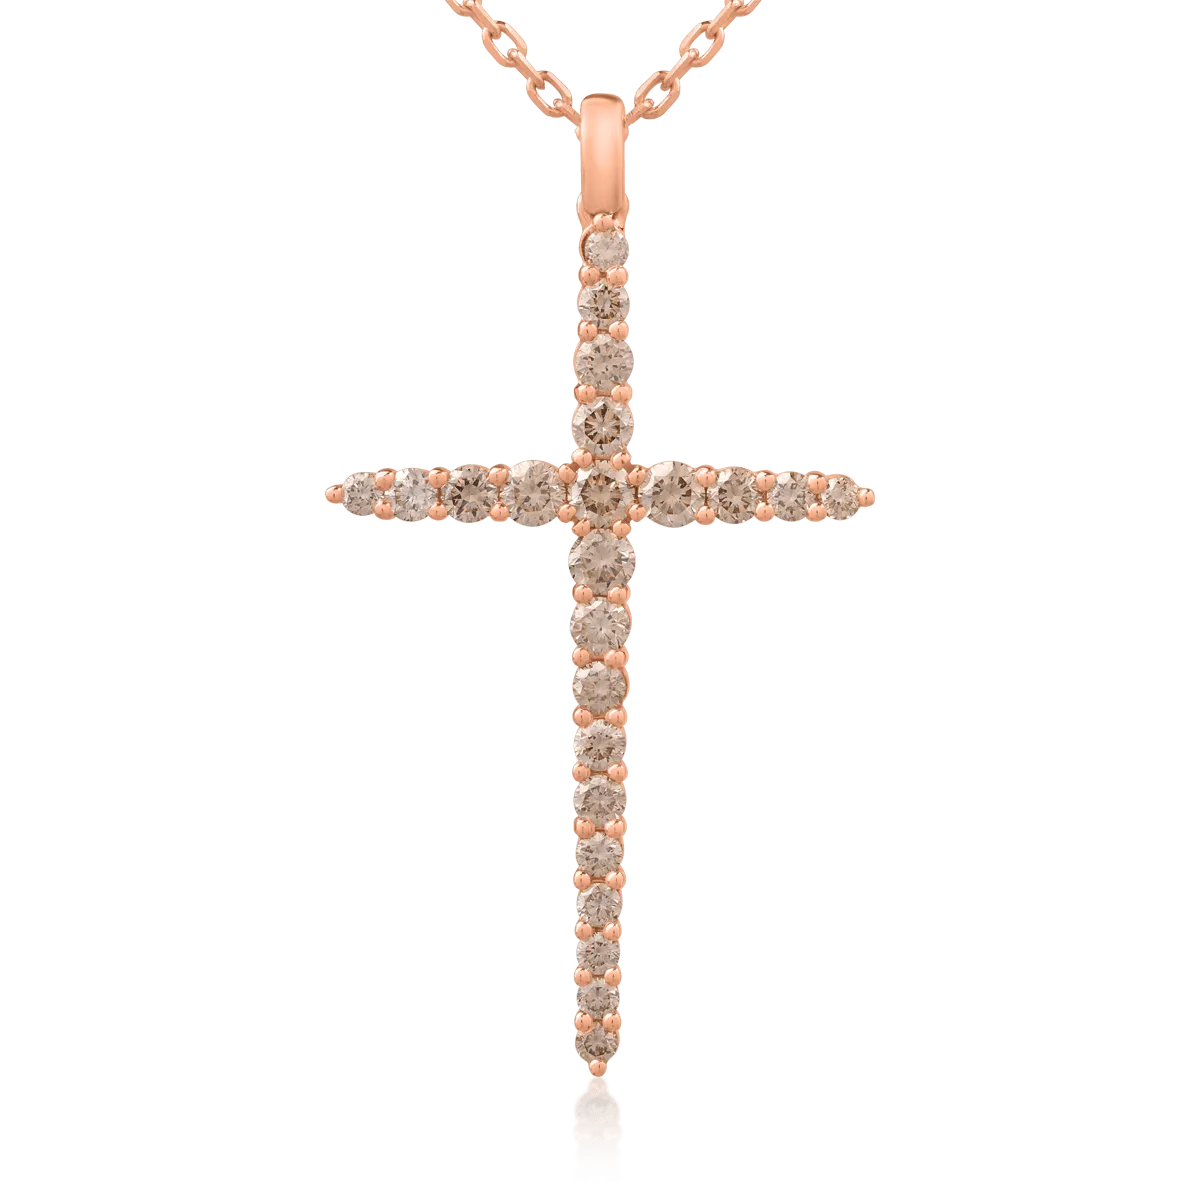 18K rose gold cross pendant necklace with 1ct brown diamonds